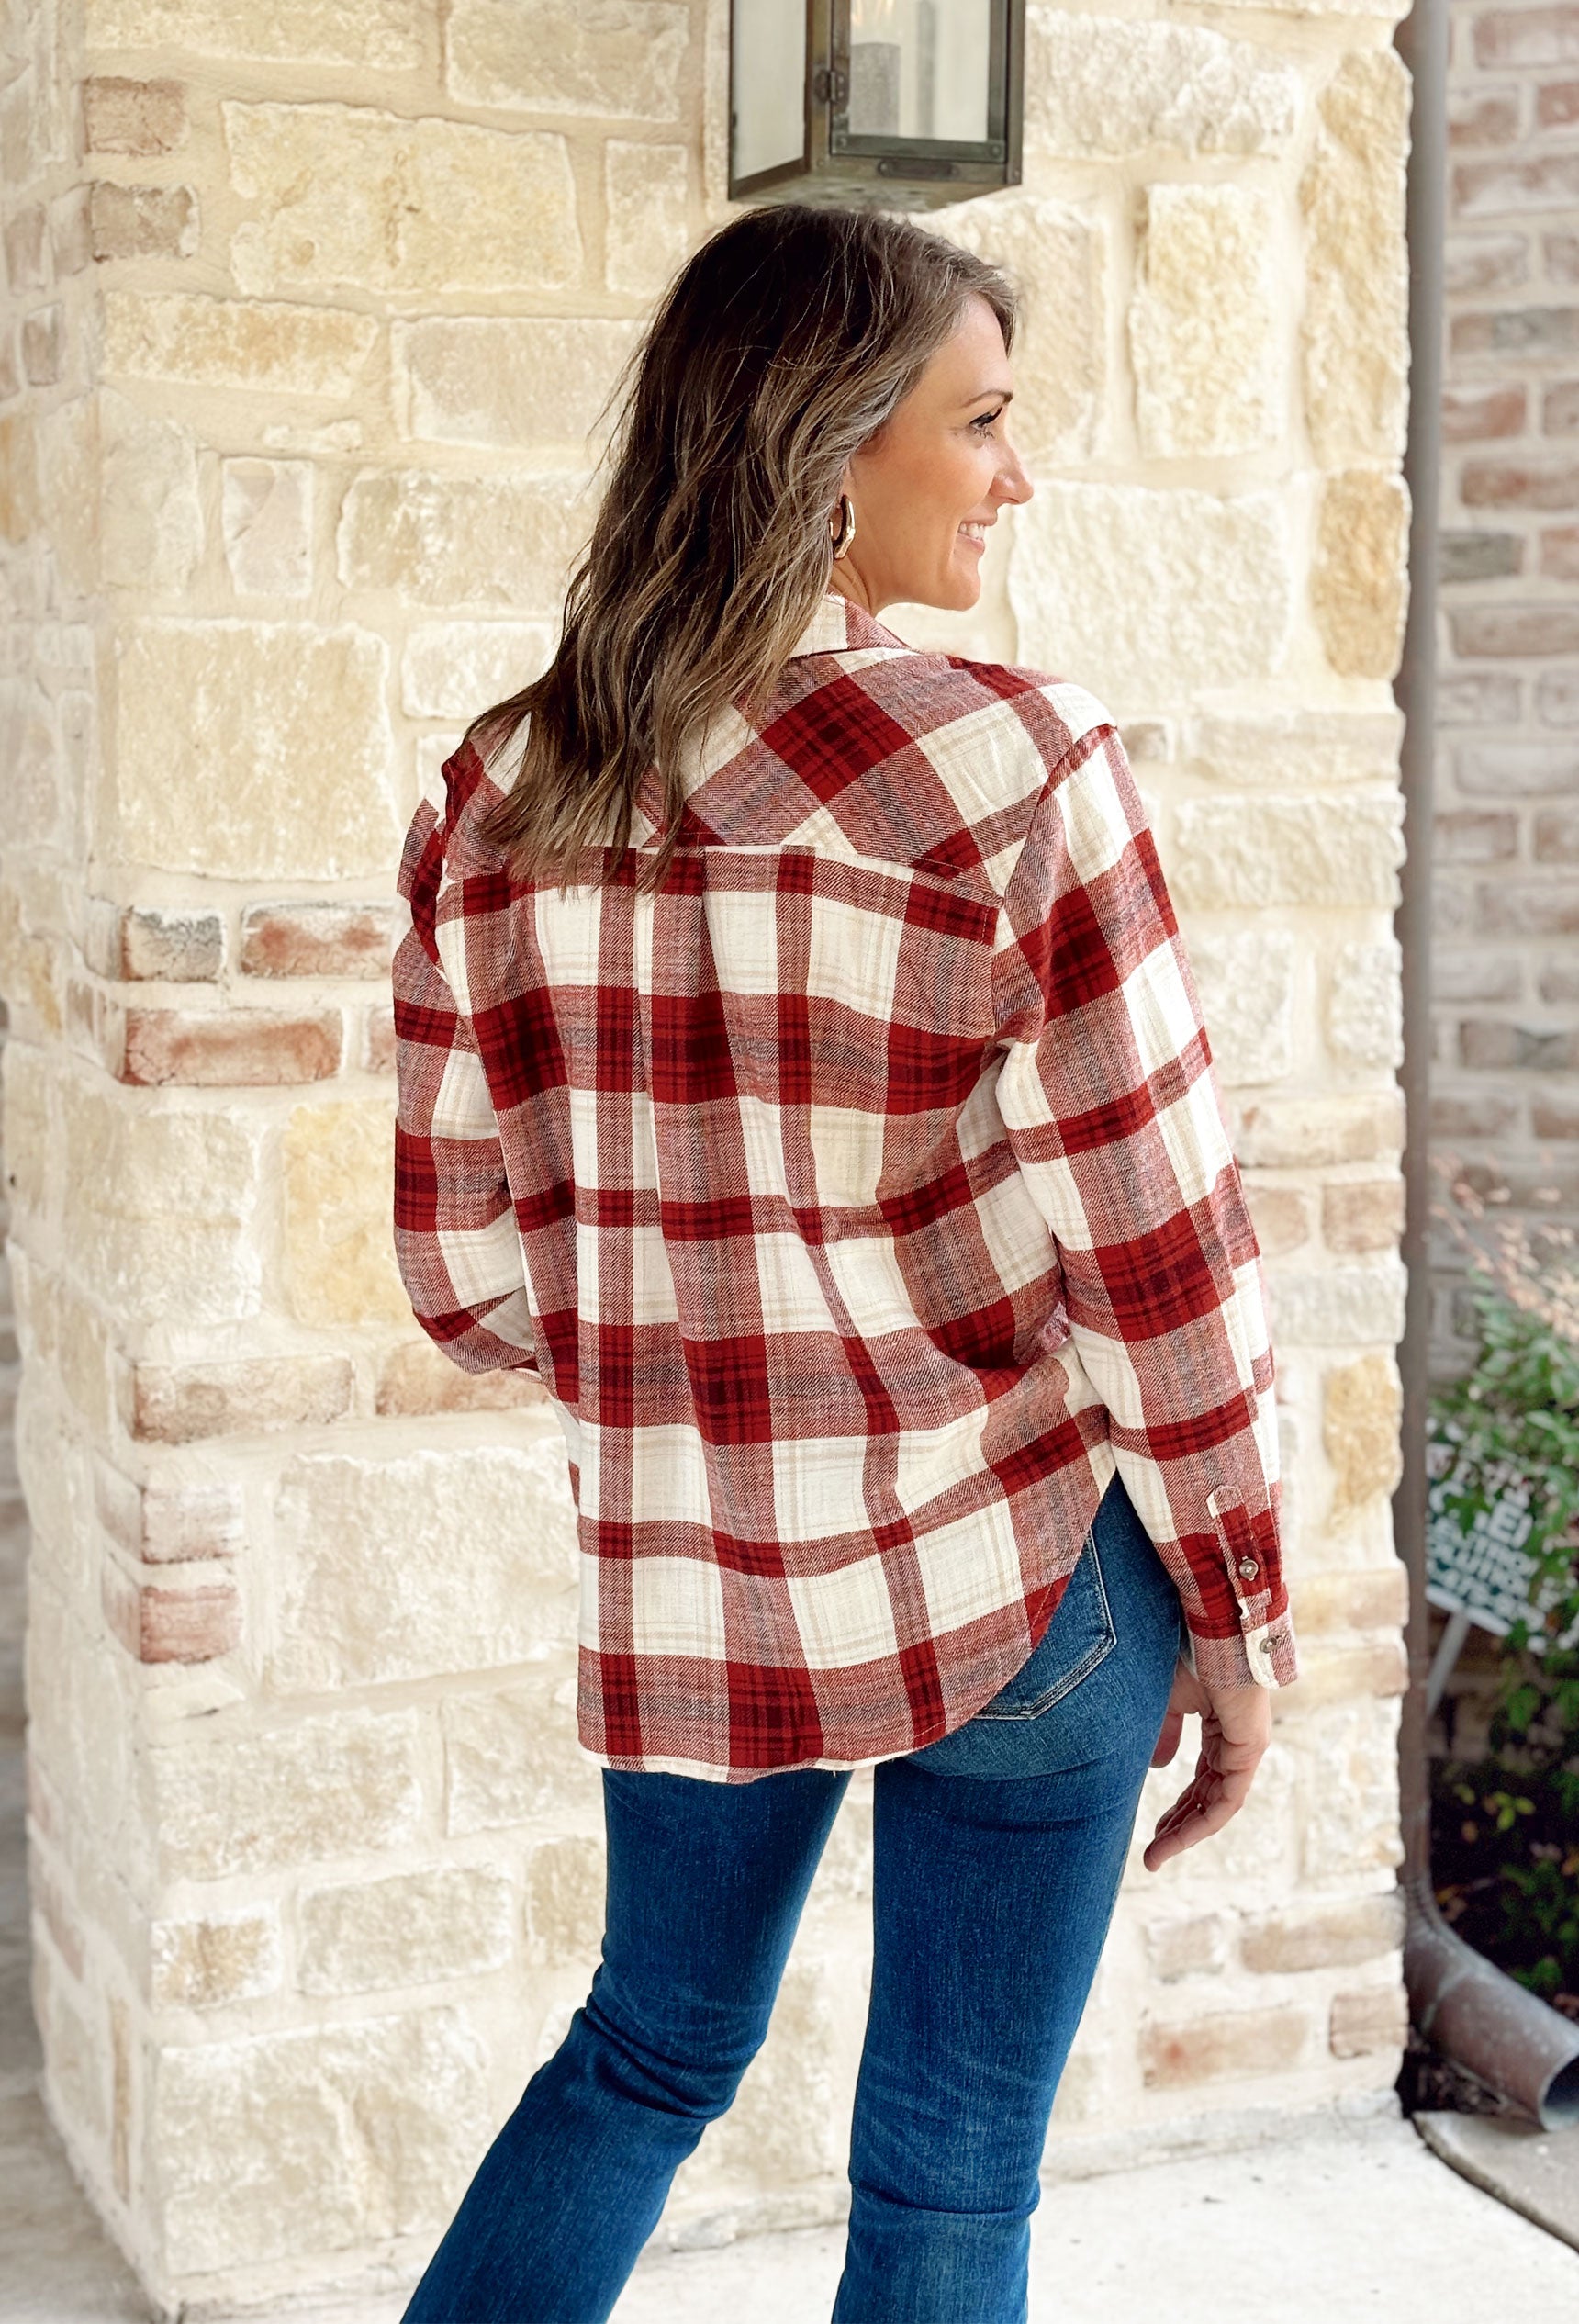 Under The Harvest Moon Flannel, red, tan, and cream flannel